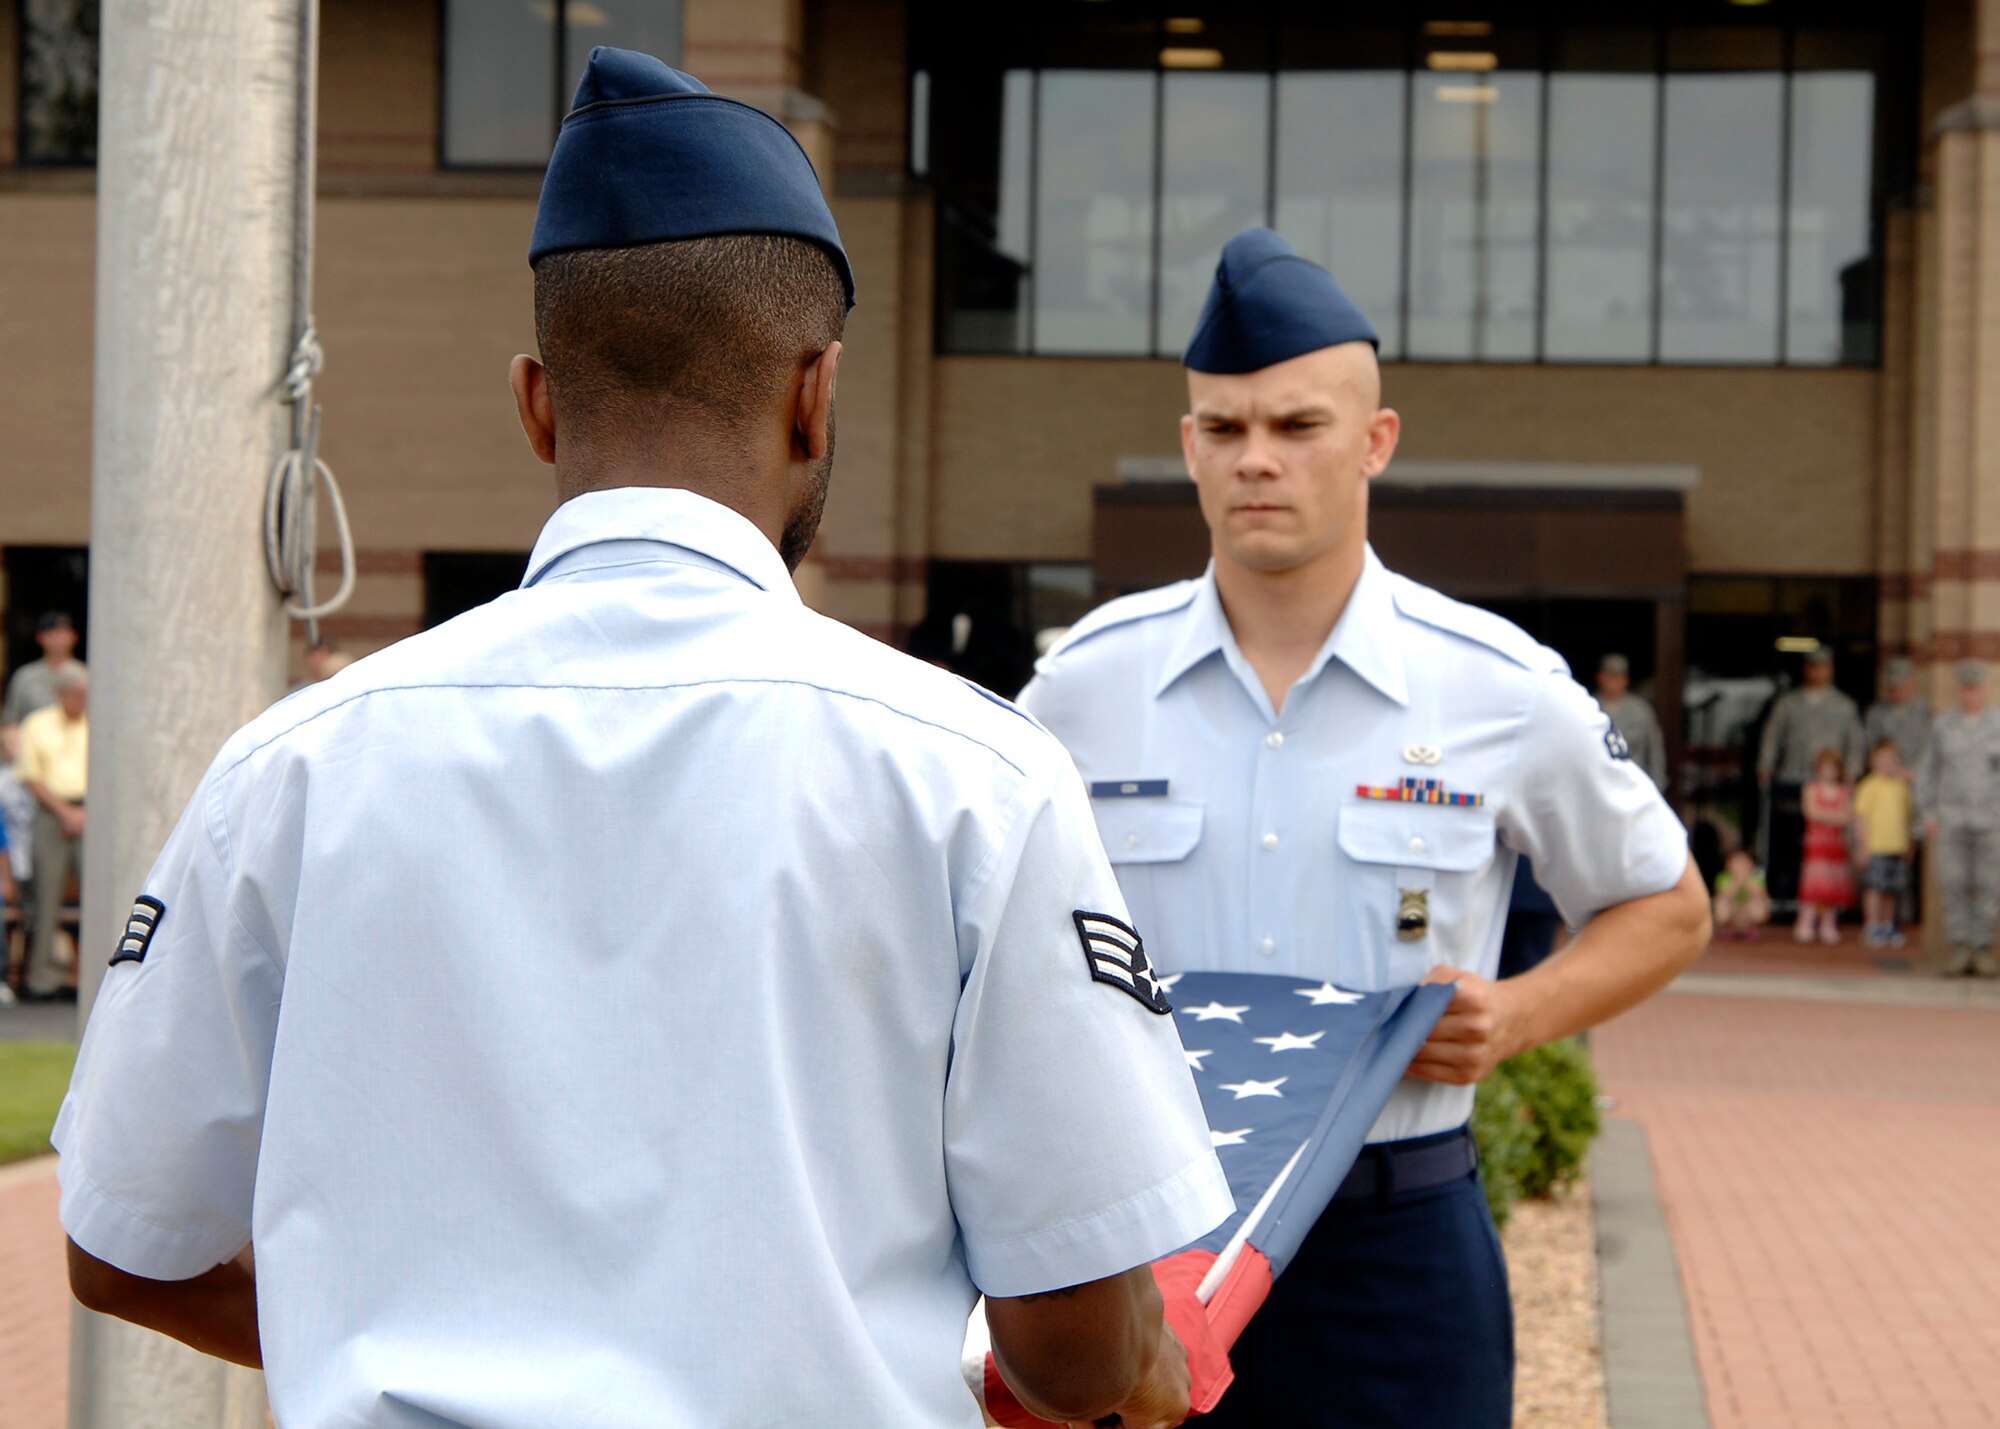 Airman 1st Class Derald Cox, 22nd Civil Engineer Squadron, and Senior Airman Antoine Steele (on left), 22nd Medical Support Squadron, fold the U.S. flag, Sept. 11, 2009, during a Patriot Day retreat ceremony at McConnell Air Force Base, Kan. Congressional public law states all U.S departments, agencies and instrumentalities should display the flag half-staff on Patriot Day. (U.S. Air Force photo/Senior Airman Anthony Mejia)